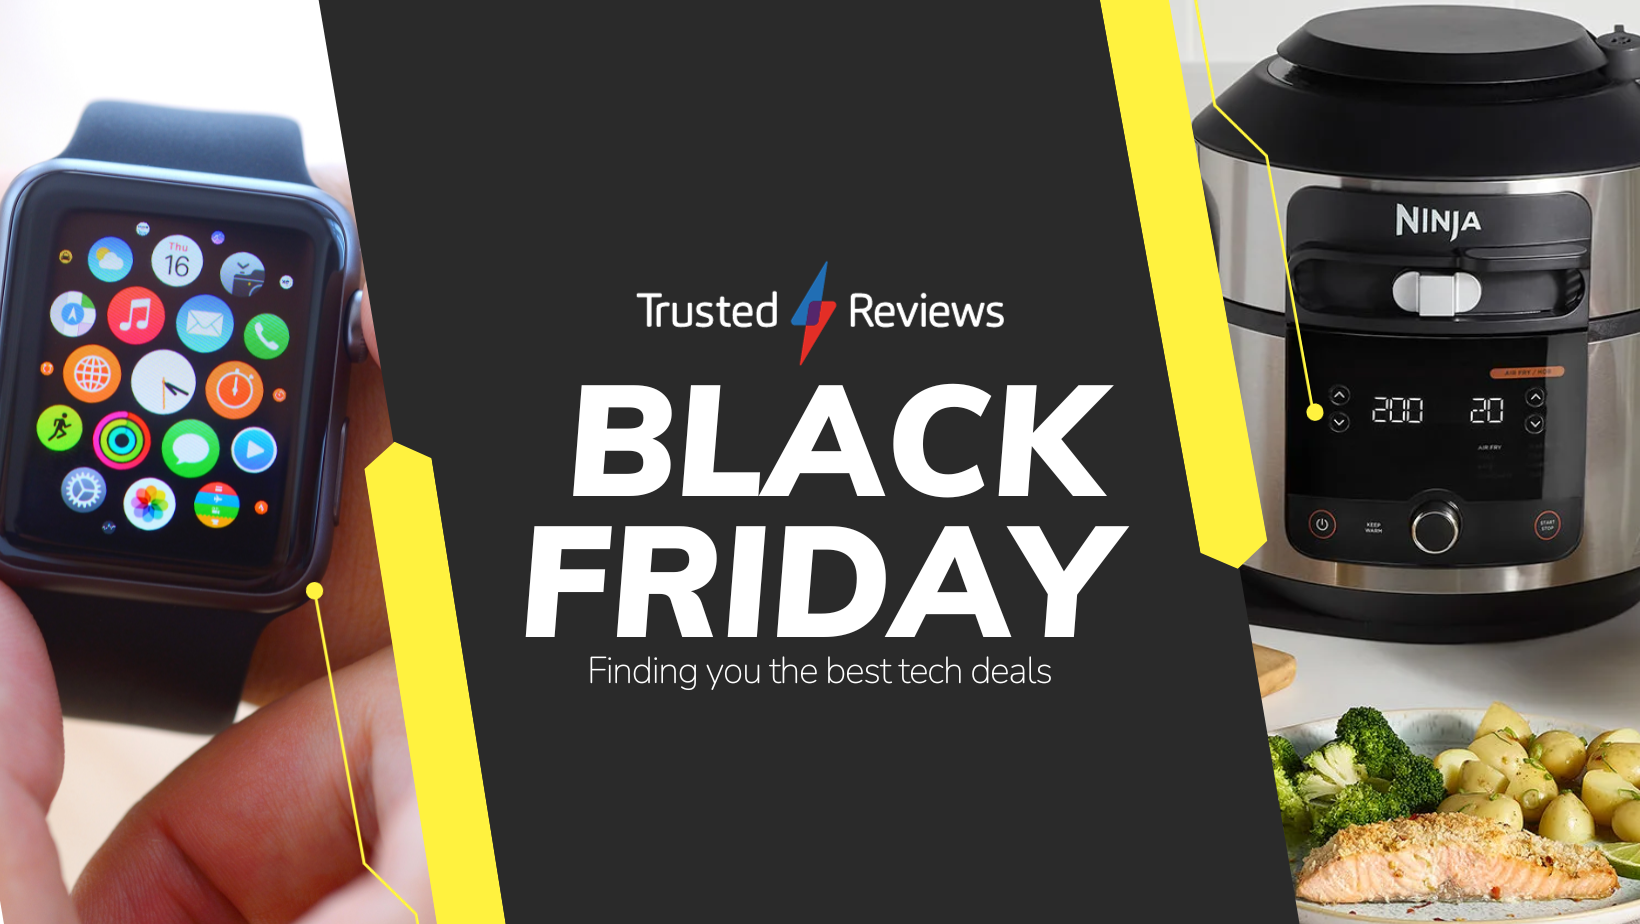 Black Friday Deals Live: Sale now on with mega discounts on the latest tech